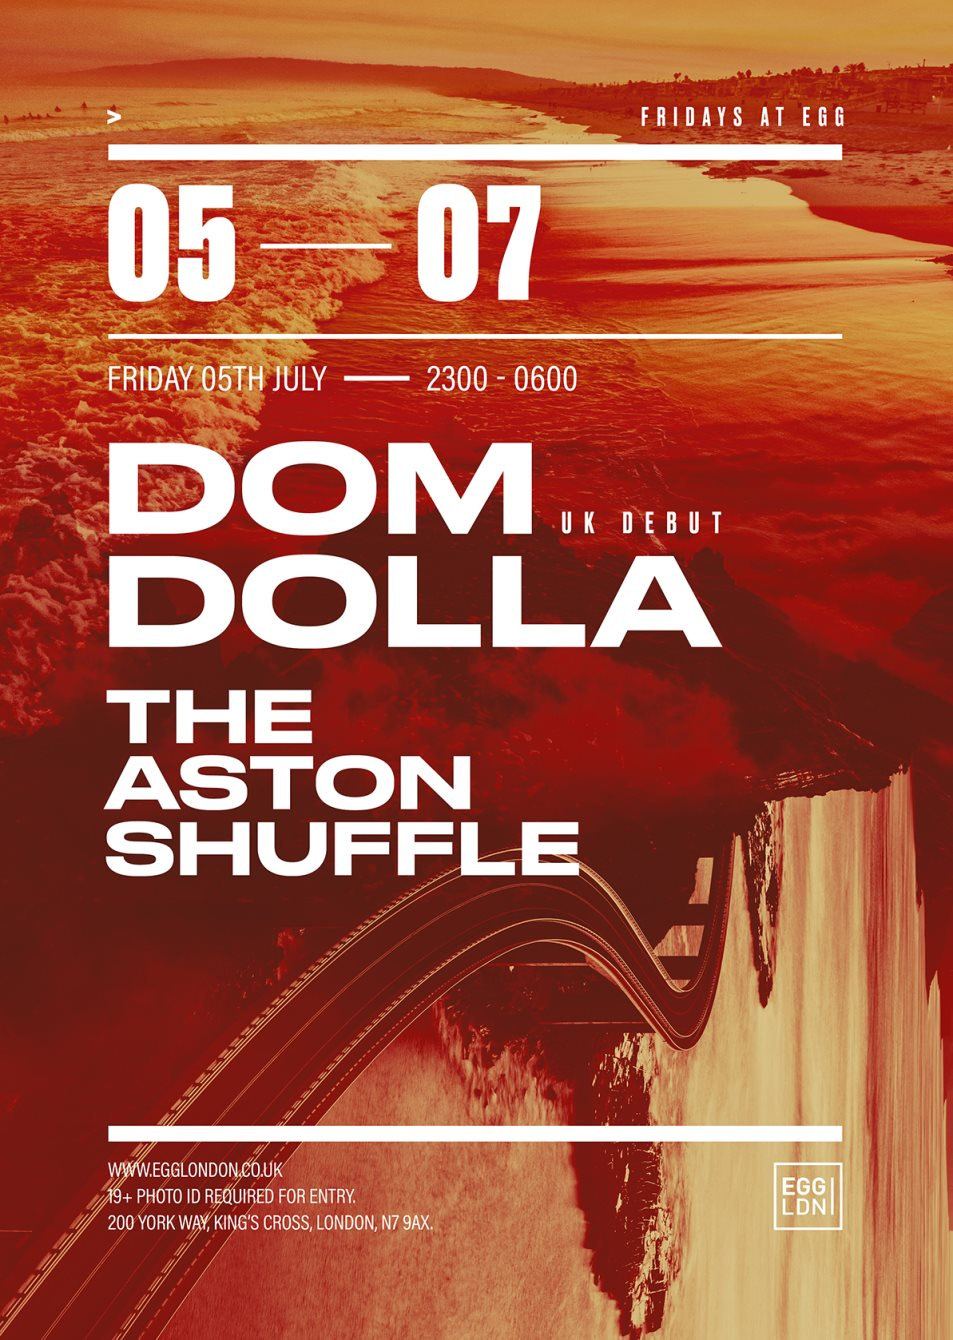 Fridays at Egg: Dom Dolla (UK Debut ) & The Aston Shuffle - Flyer front